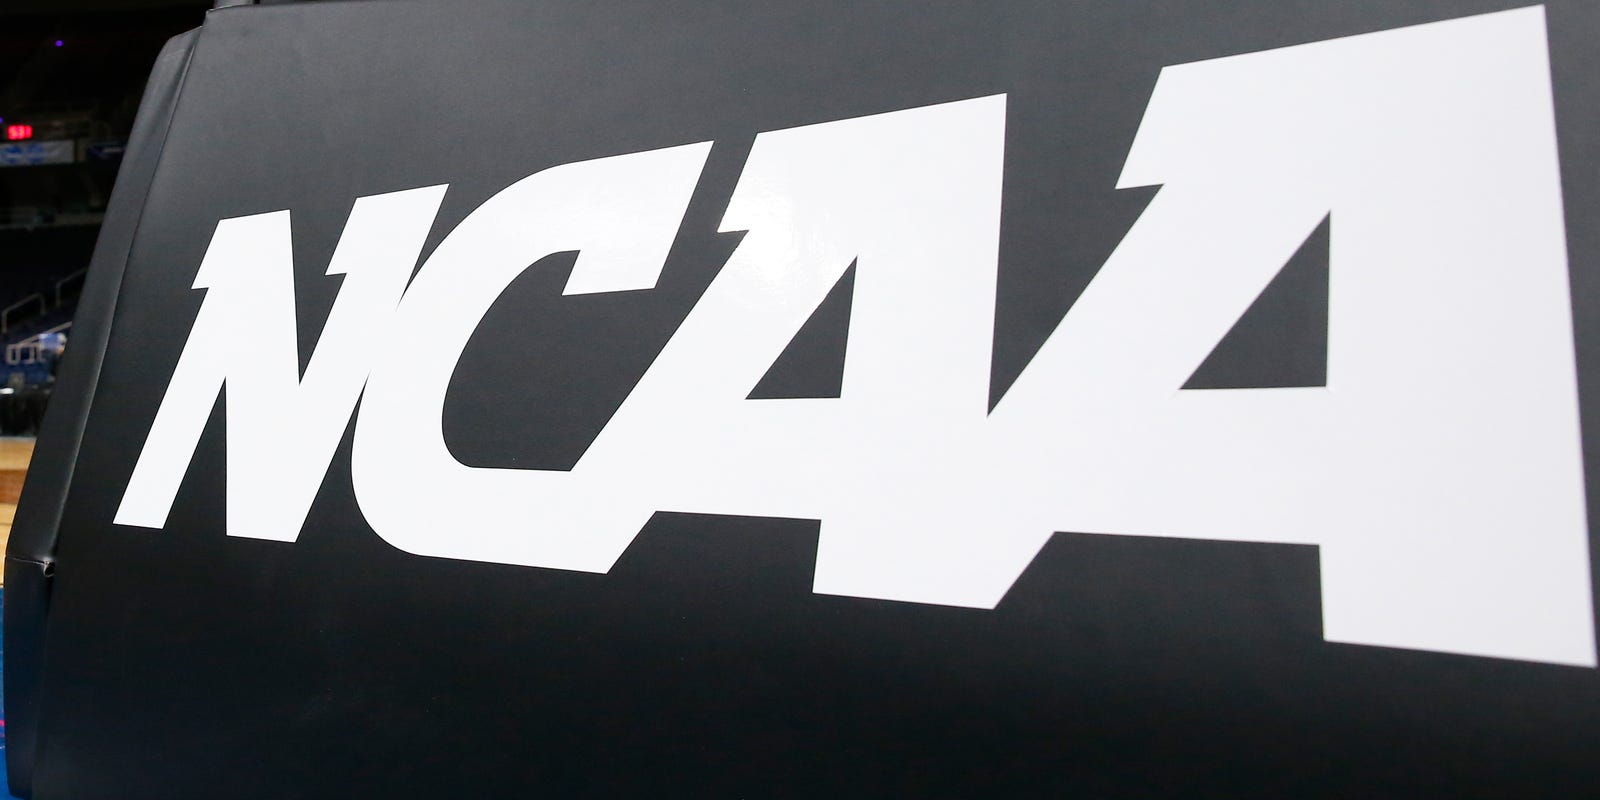 Here’s how NCAA’s new ‘ridiculously complex’ transgender guidelines complicate hot-button issue